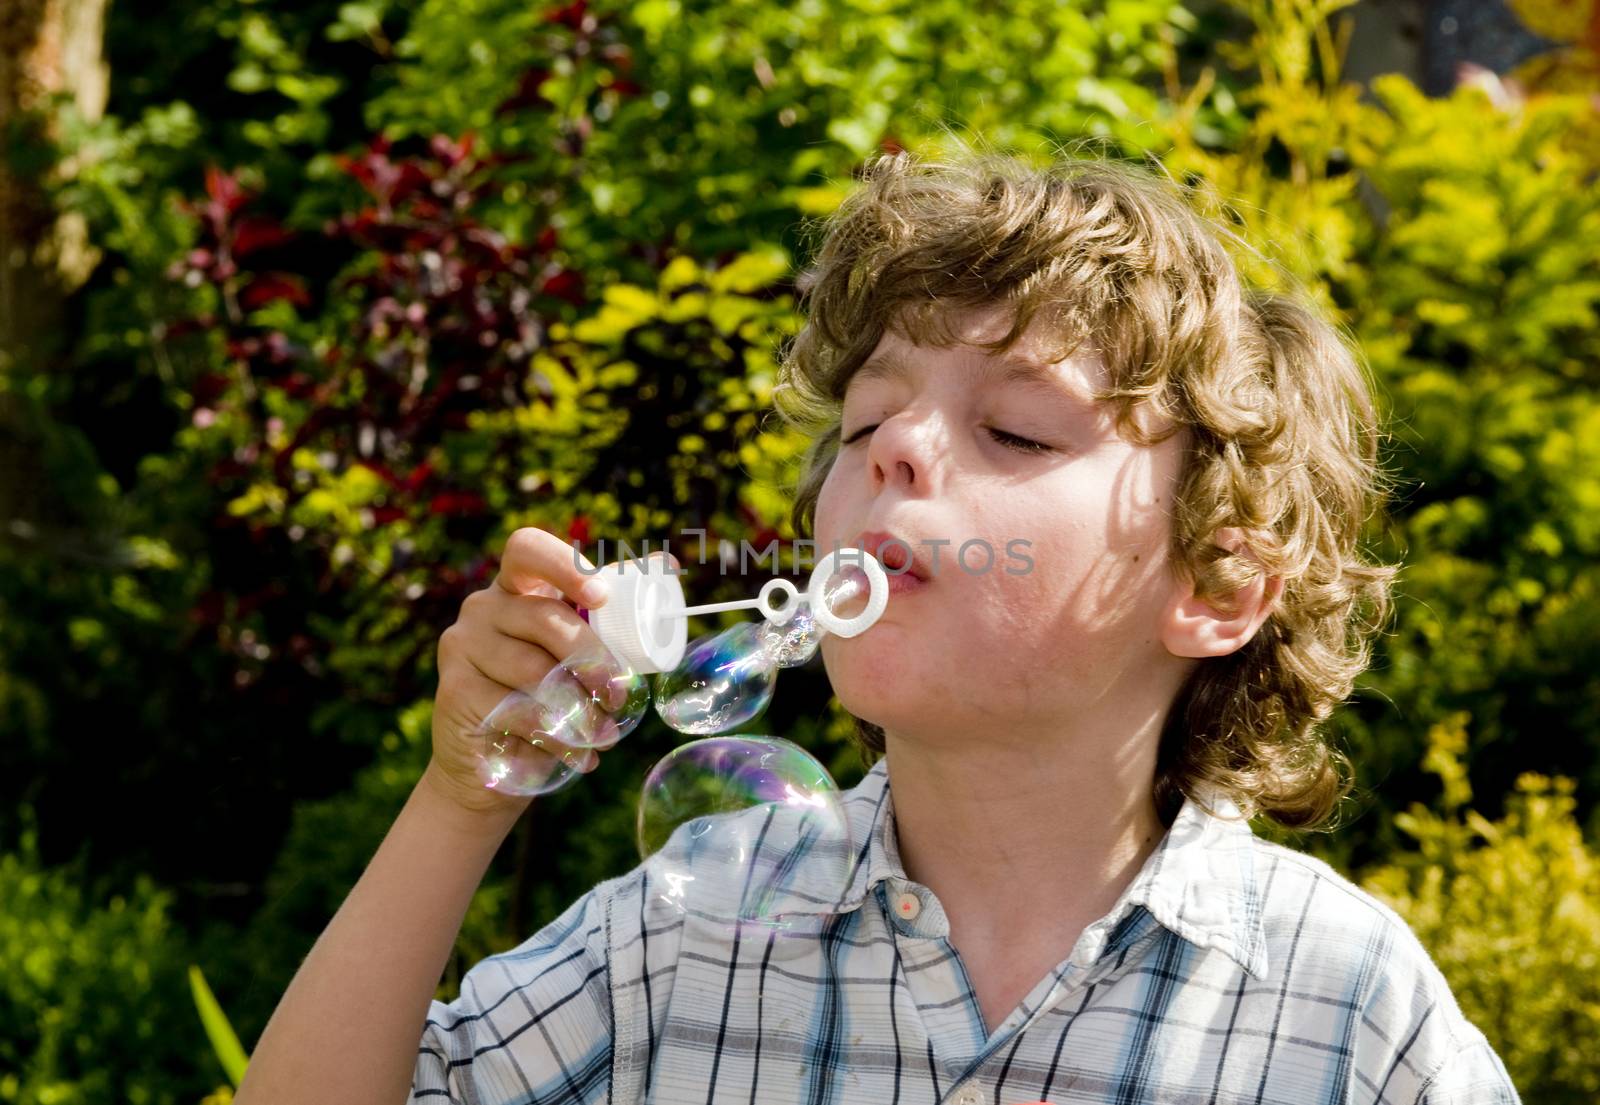 boy blowing bubbles by compuinfoto